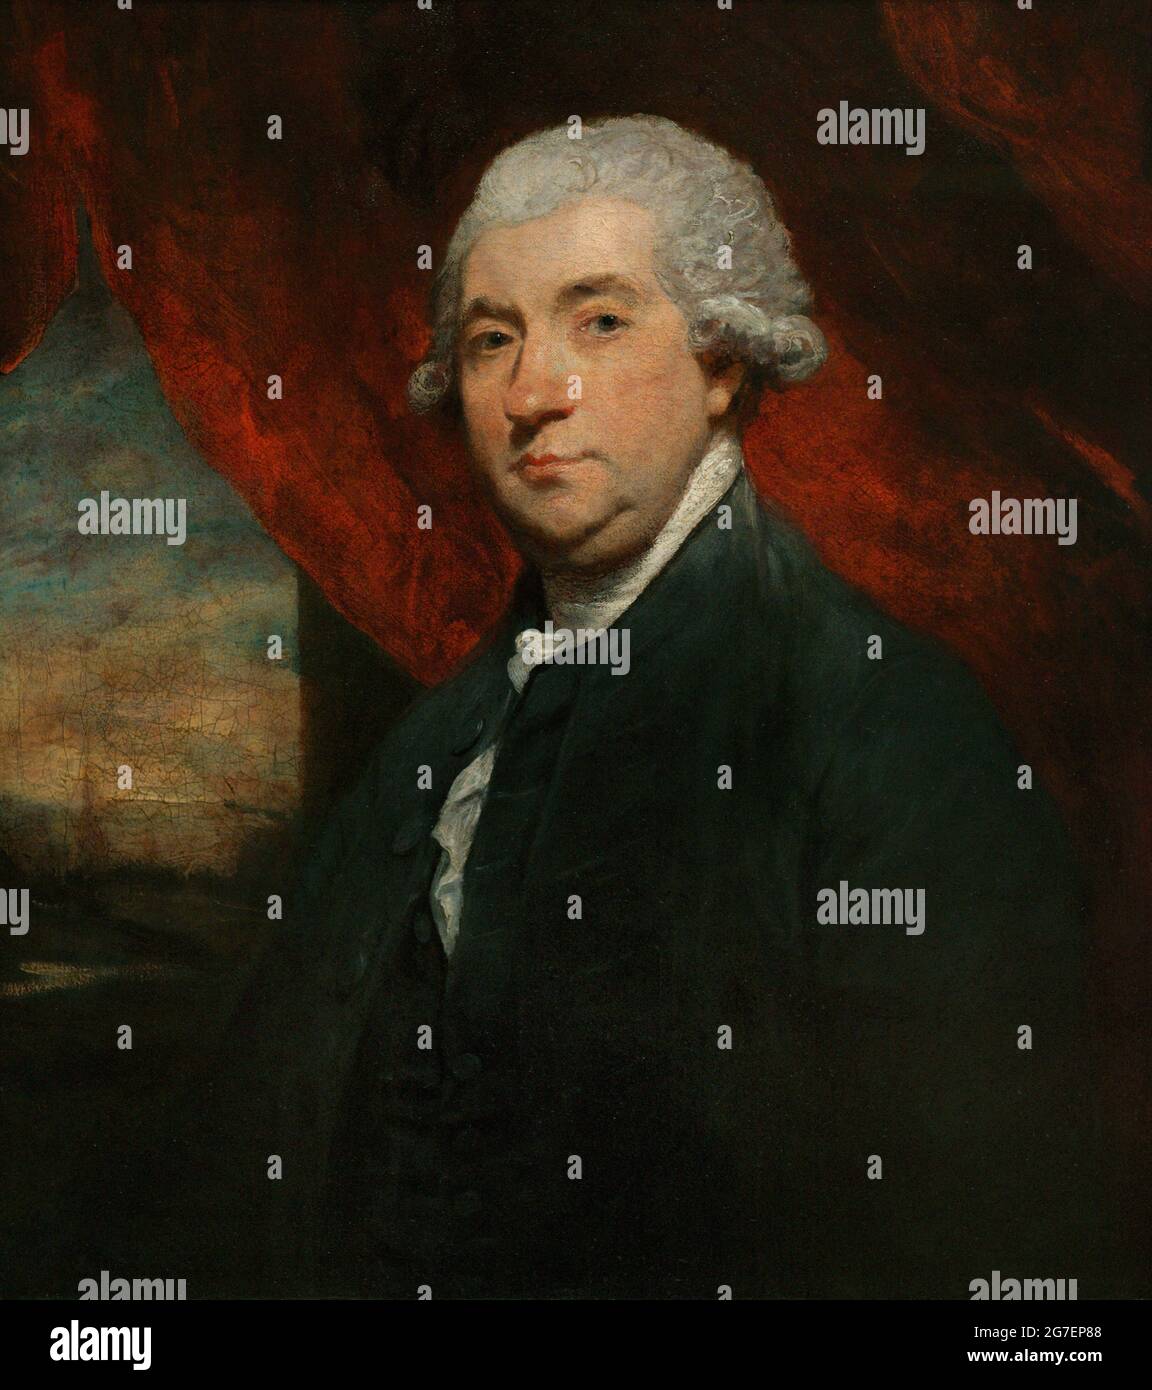 James Boswell, 9th Laird of Auchinleck (1740-1795). Scottish lawyer and writer. Biographer of Dr Samuel Johnson. Portrait by Joshua Reynolds (1723-1792) in 1785. Oil on canvas (76,2 x 63,5 cm). National Portrait Gallery. London. England. United Kingdom. Stock Photo